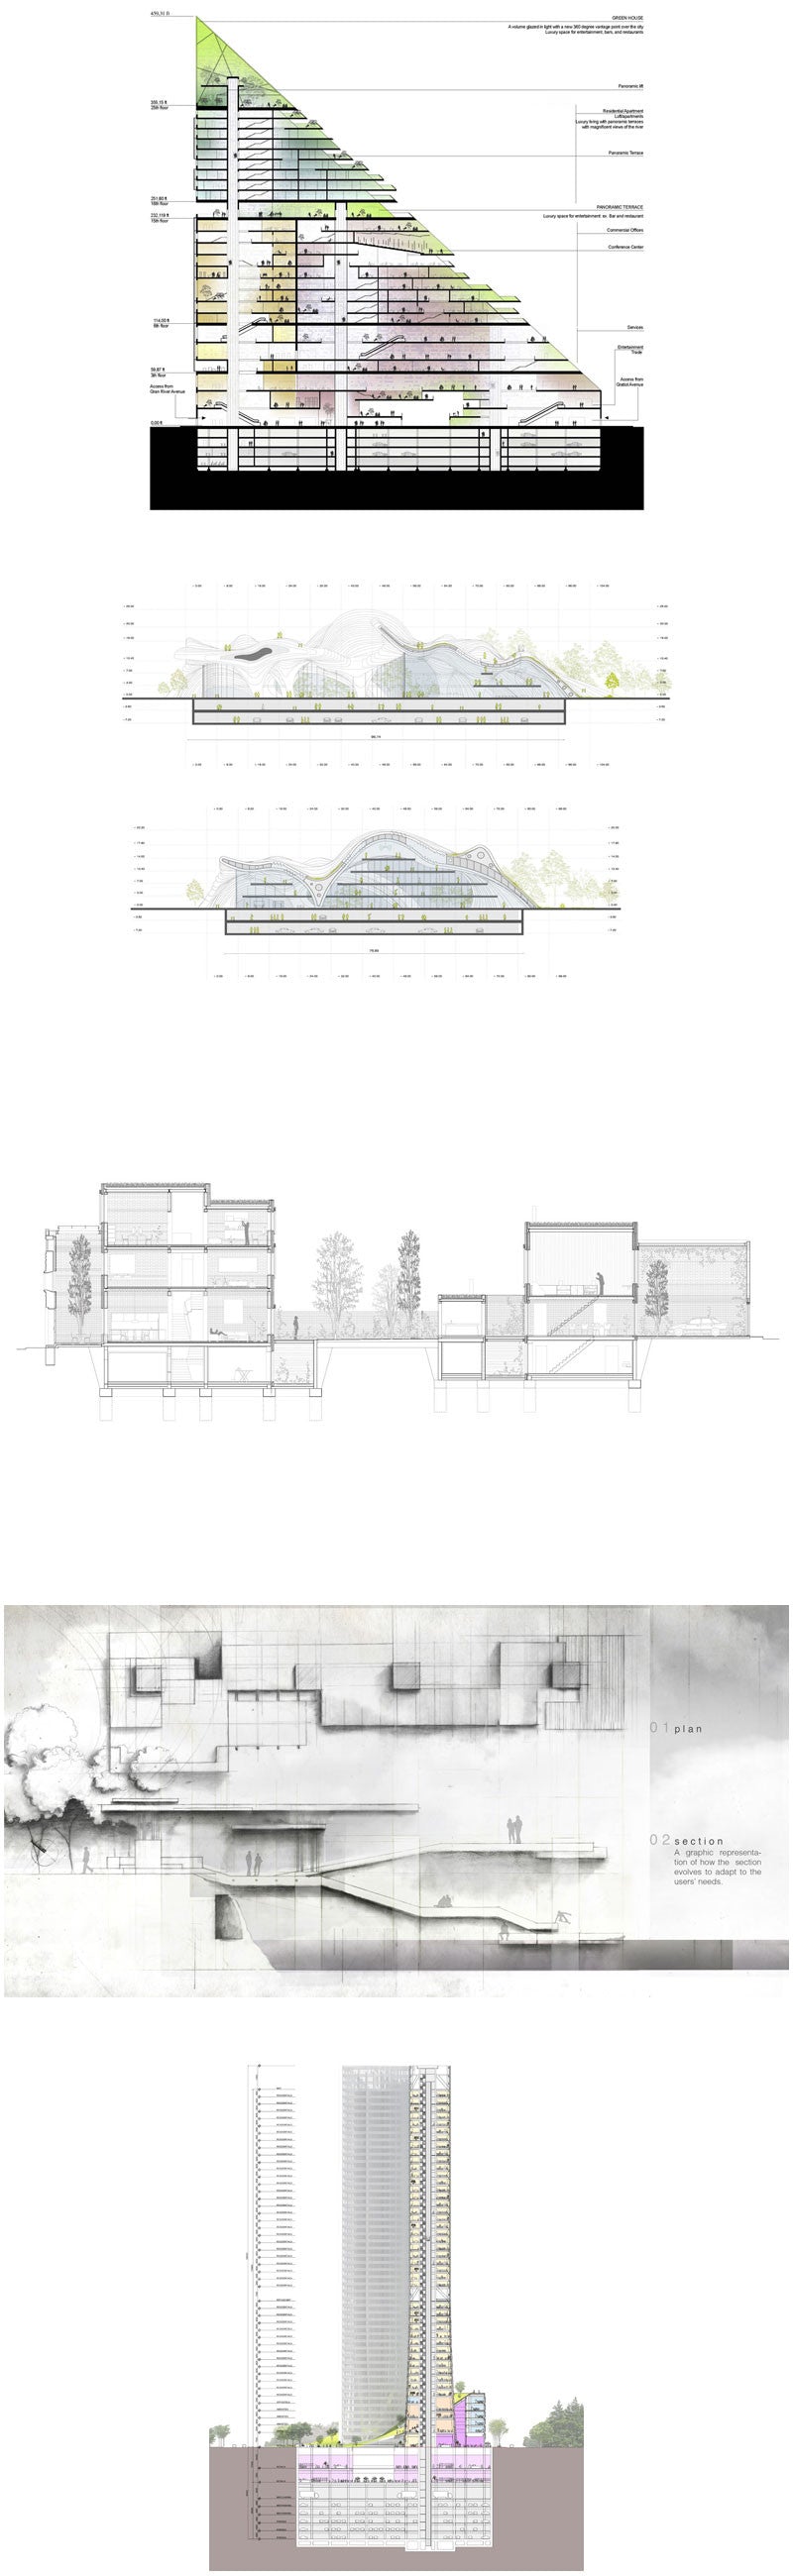 Architectural sections and elevations Gallery V.1